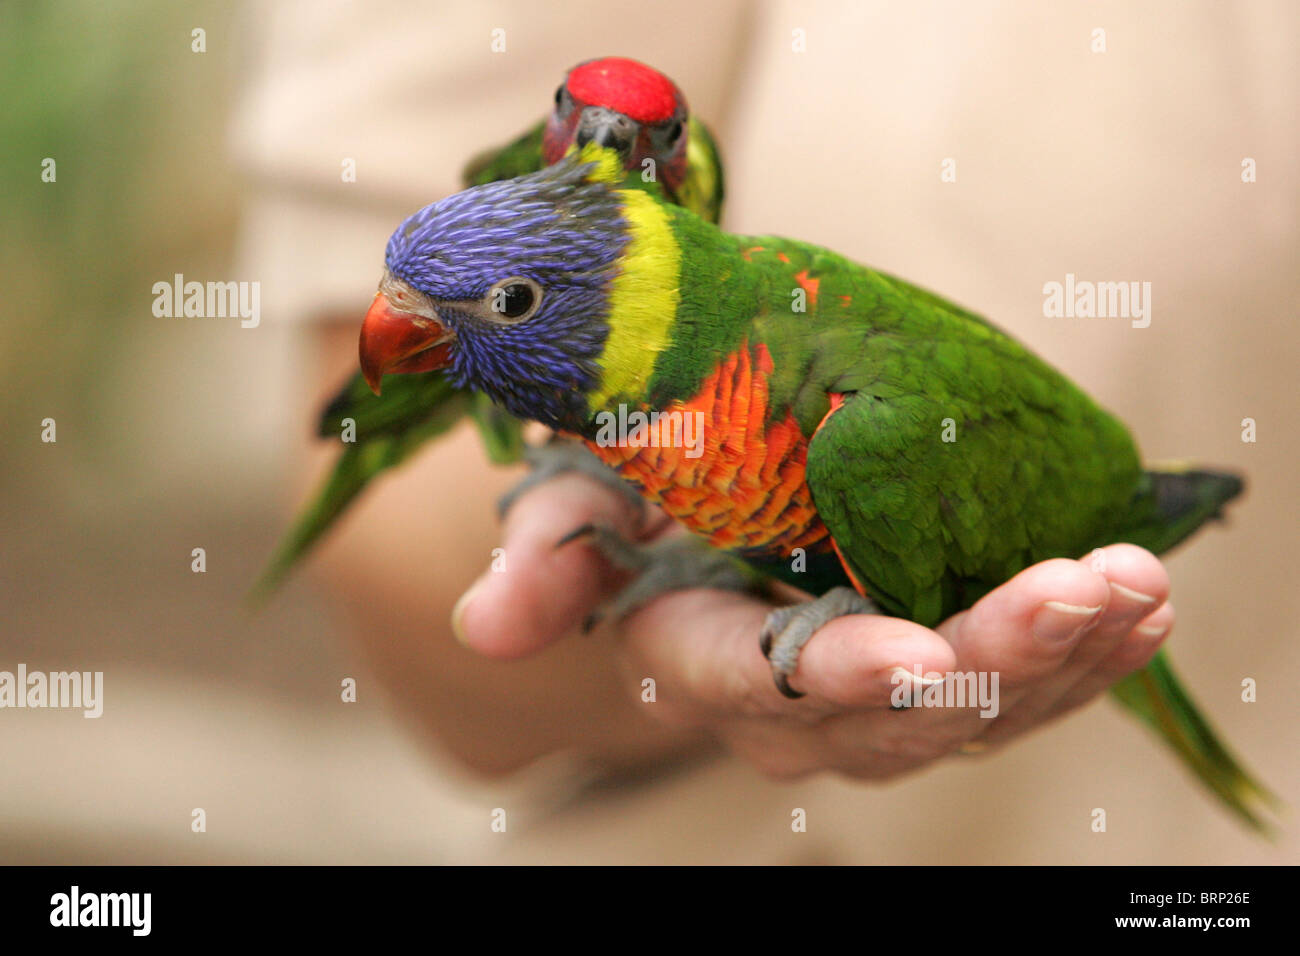 Rainbow Lorikeets perched on a persons hand Stock Photo